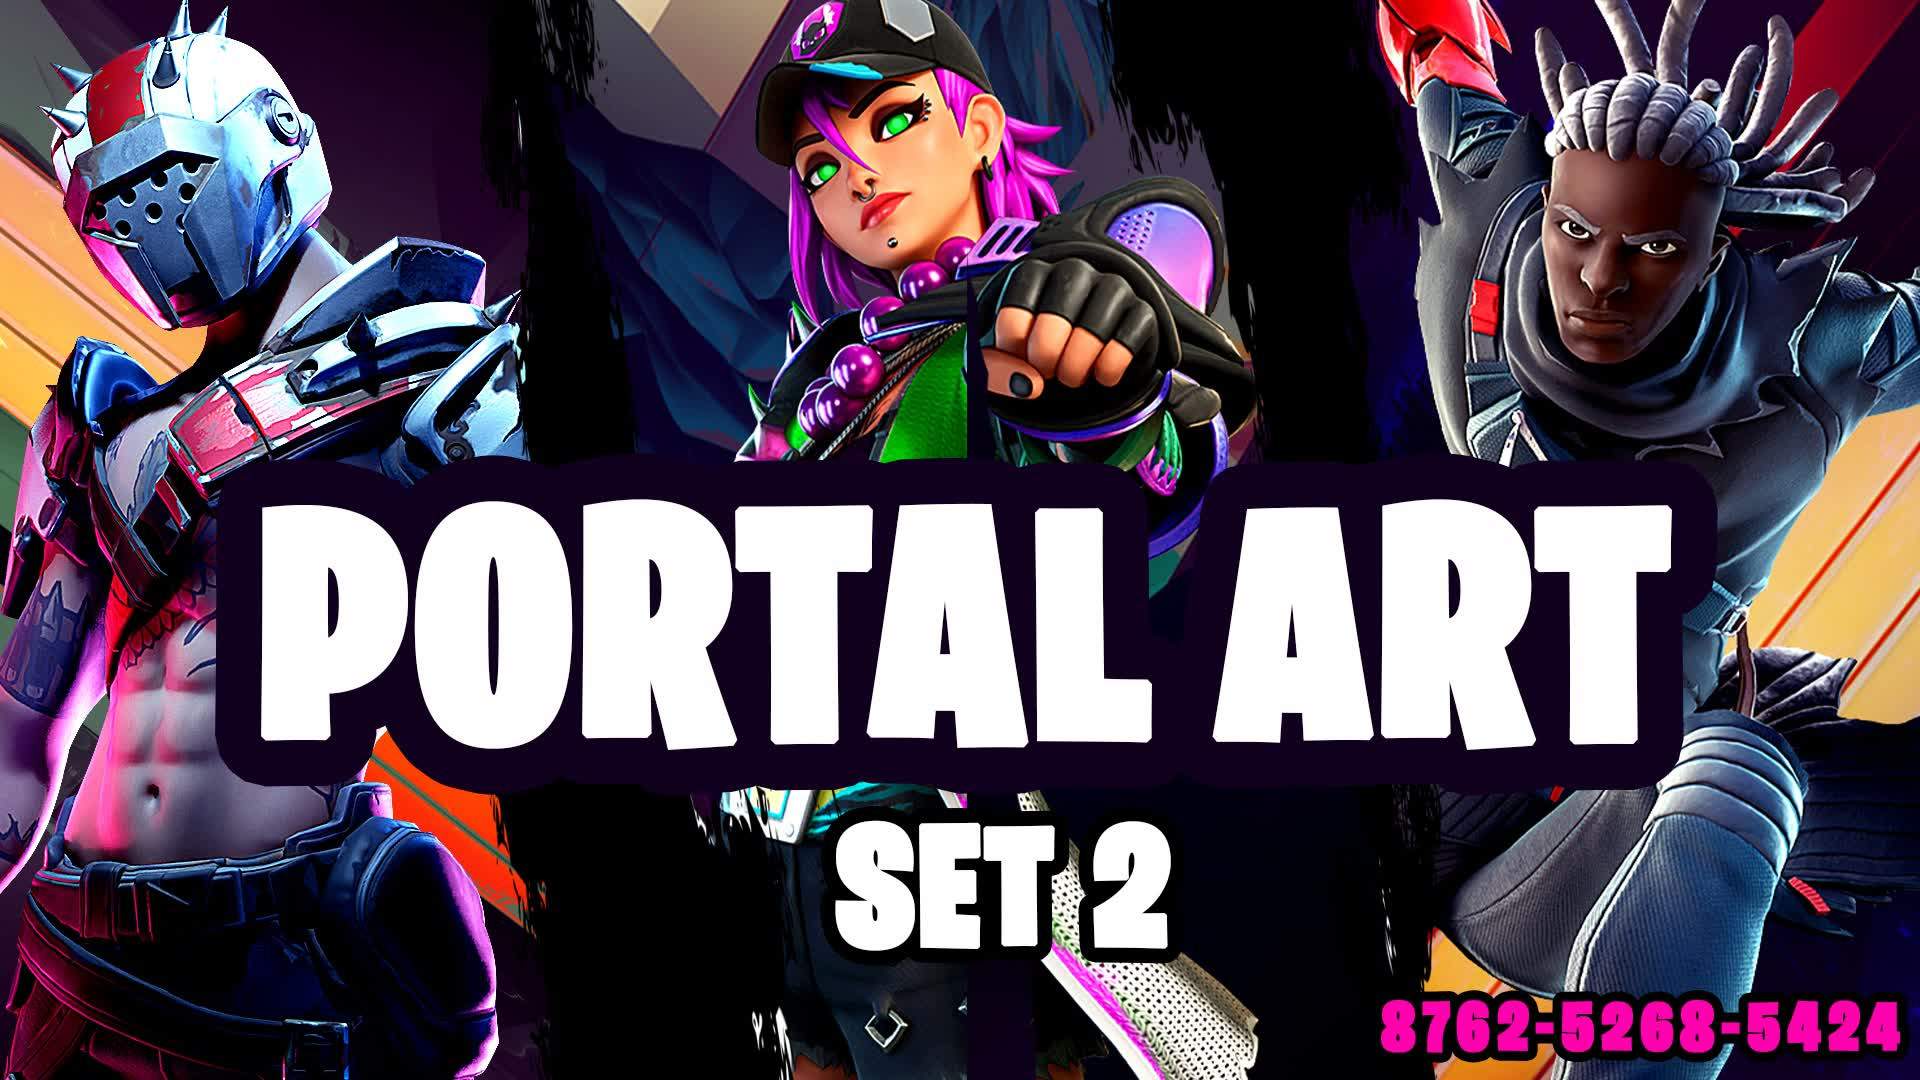 pro] Portal Art (set 2) - Fortnite Creative Other and Fun Map Code